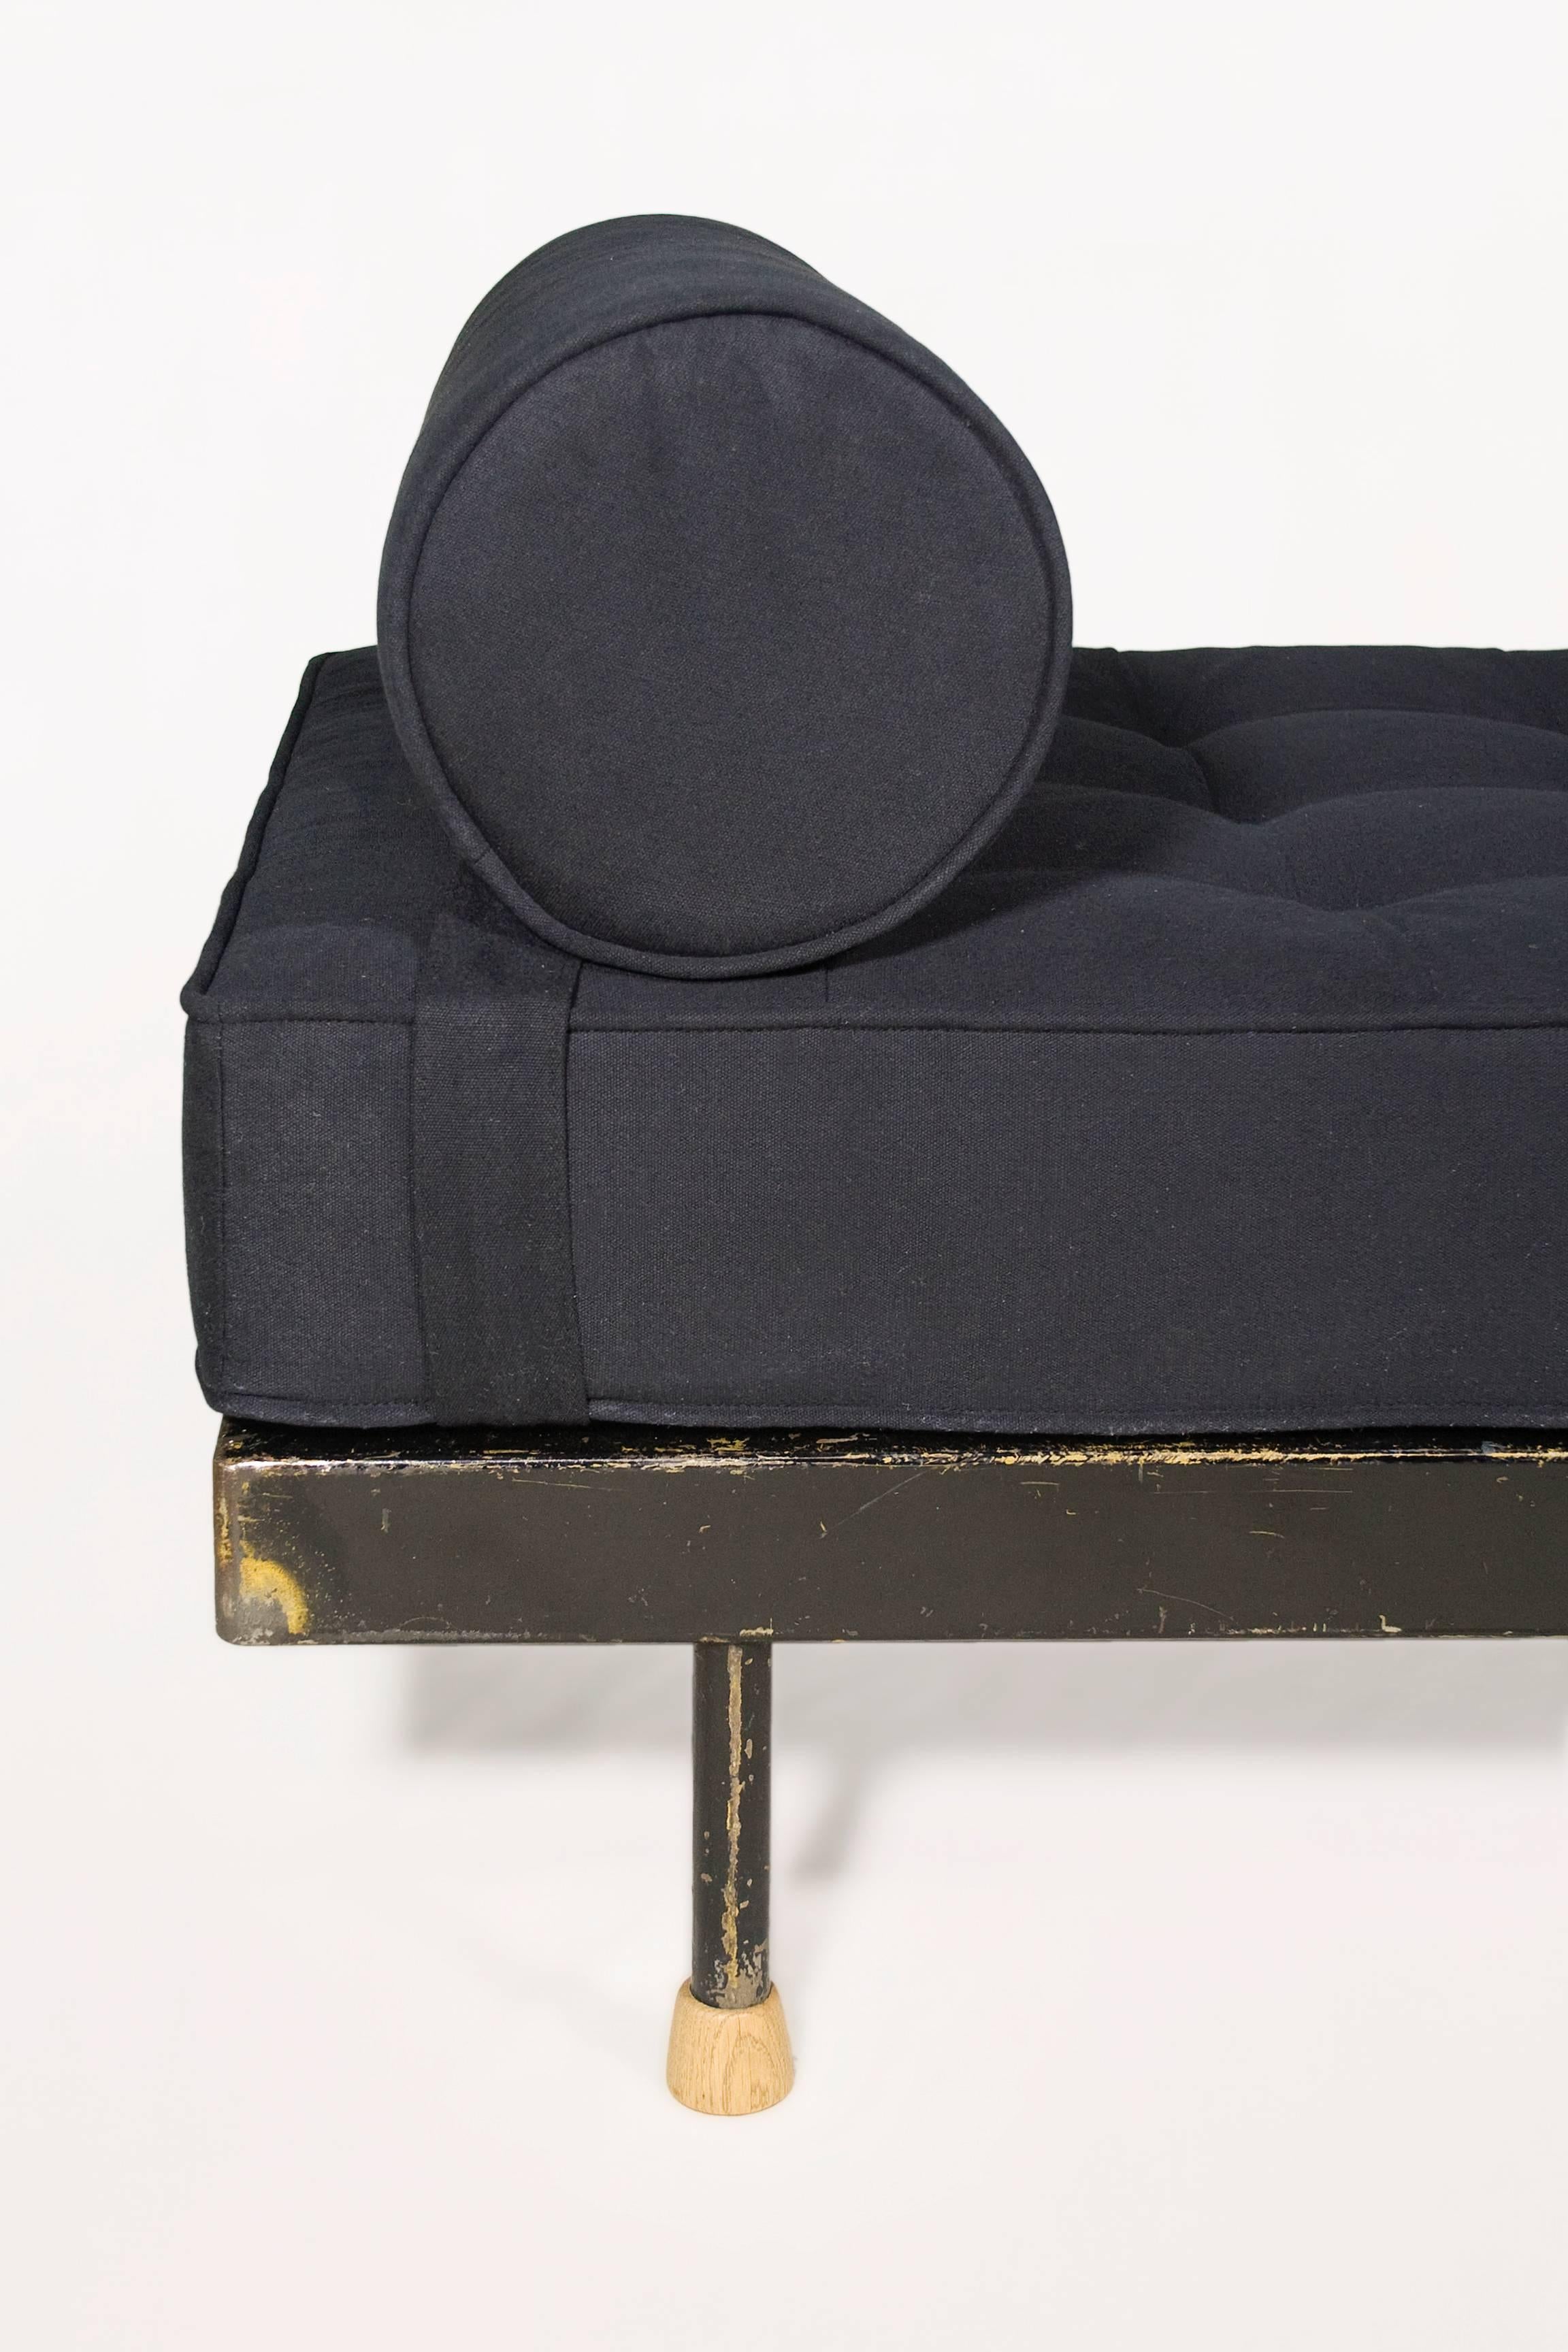 French Jean Prouvé SCAL nº 450 Daybed, circa 1950, France